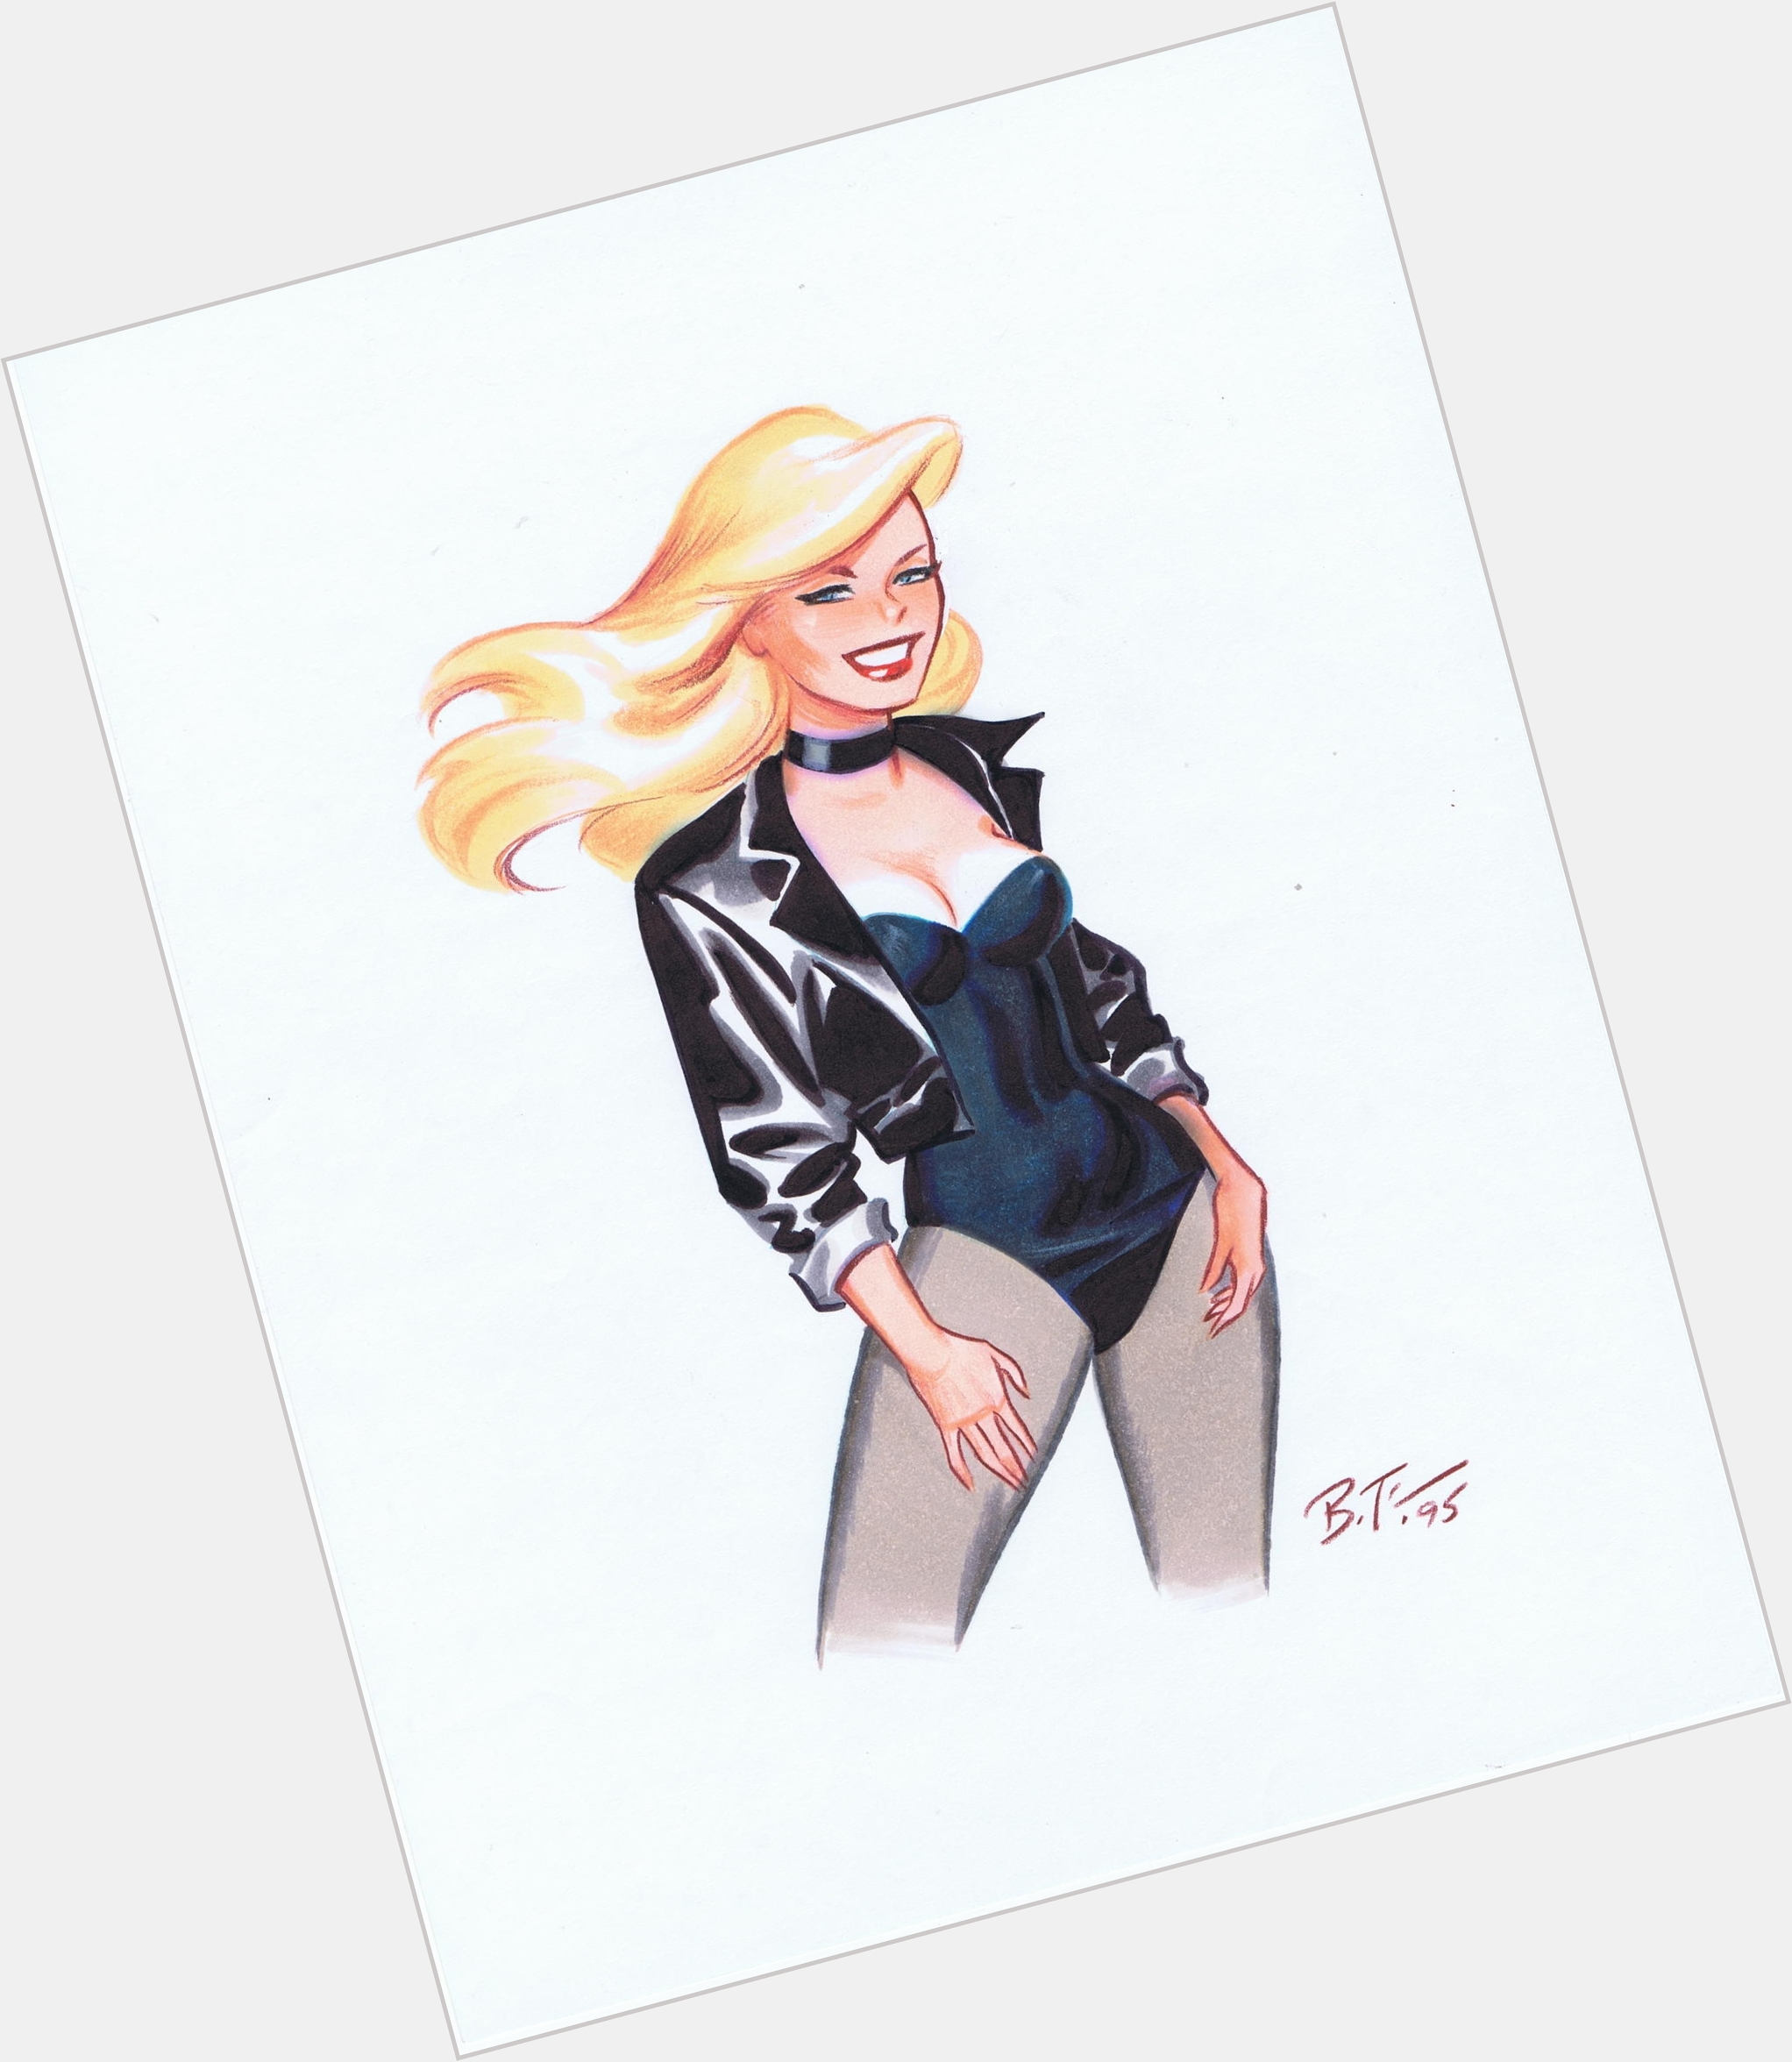 Bruce Timm dating 2